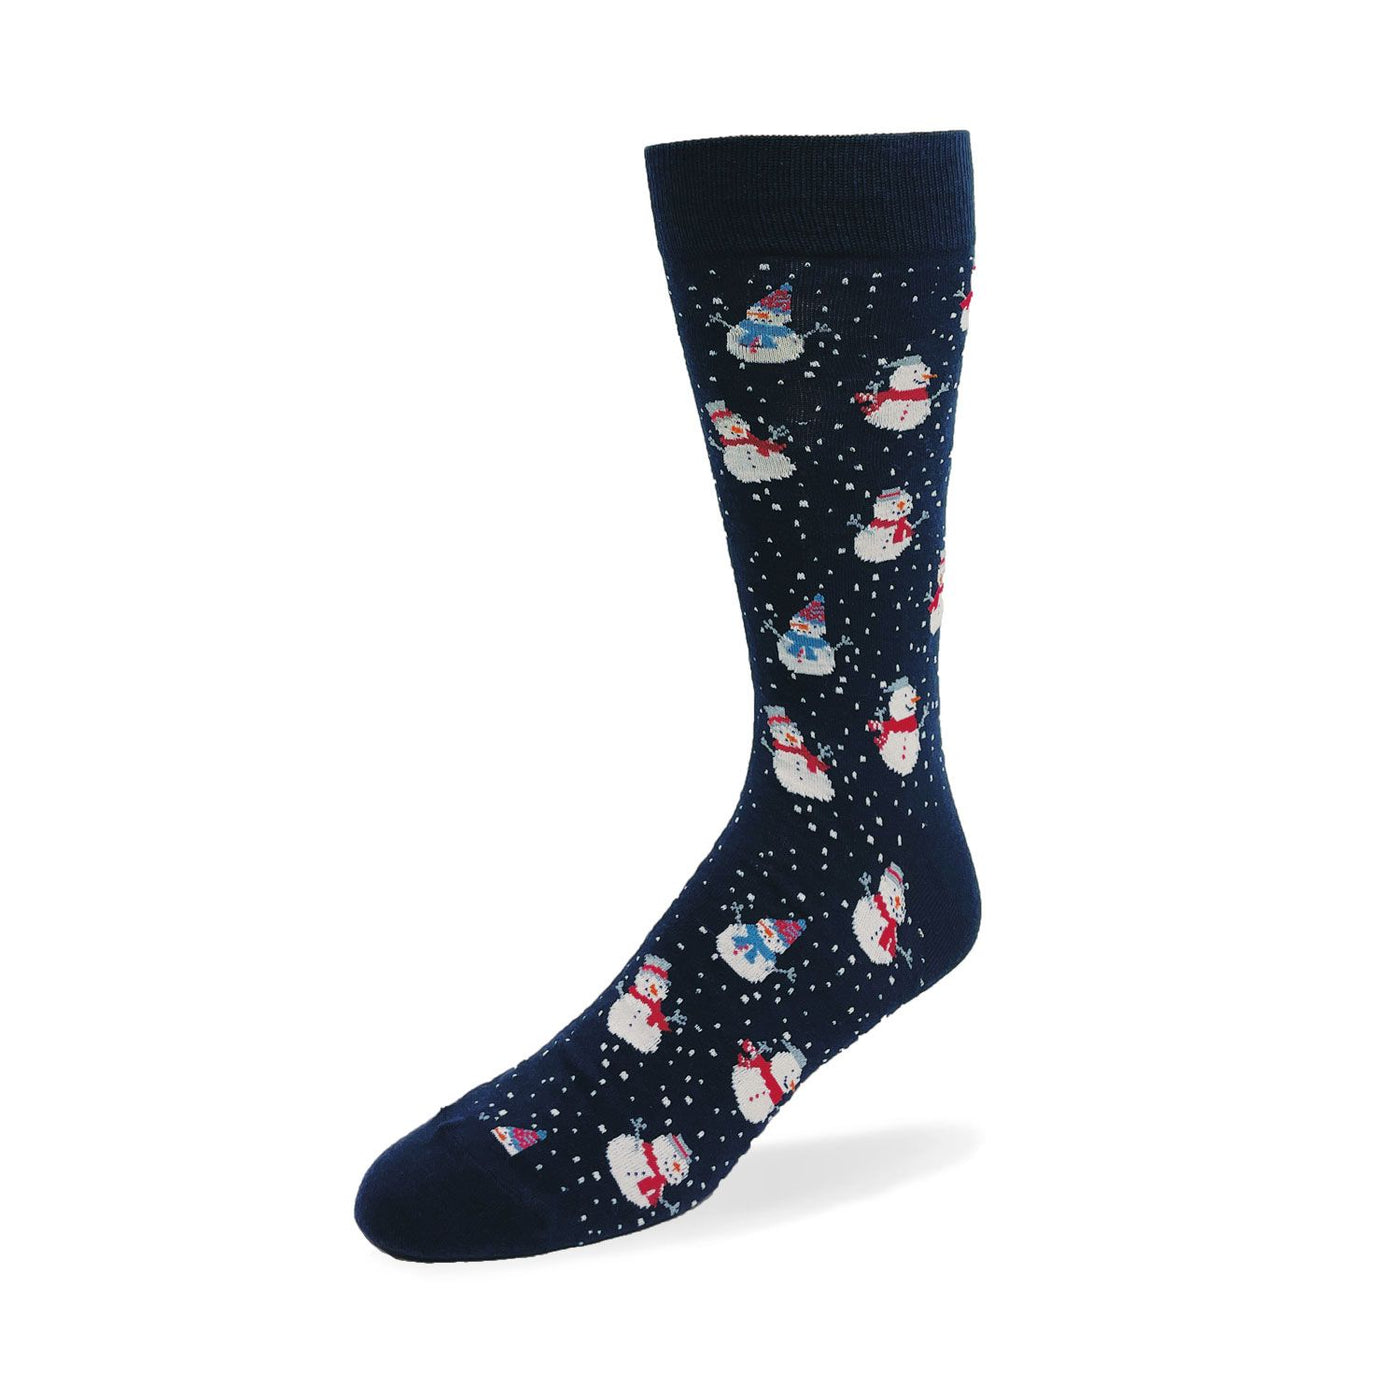 "Snowman" Combed Cotton Dress Socks by Point Zero-Large